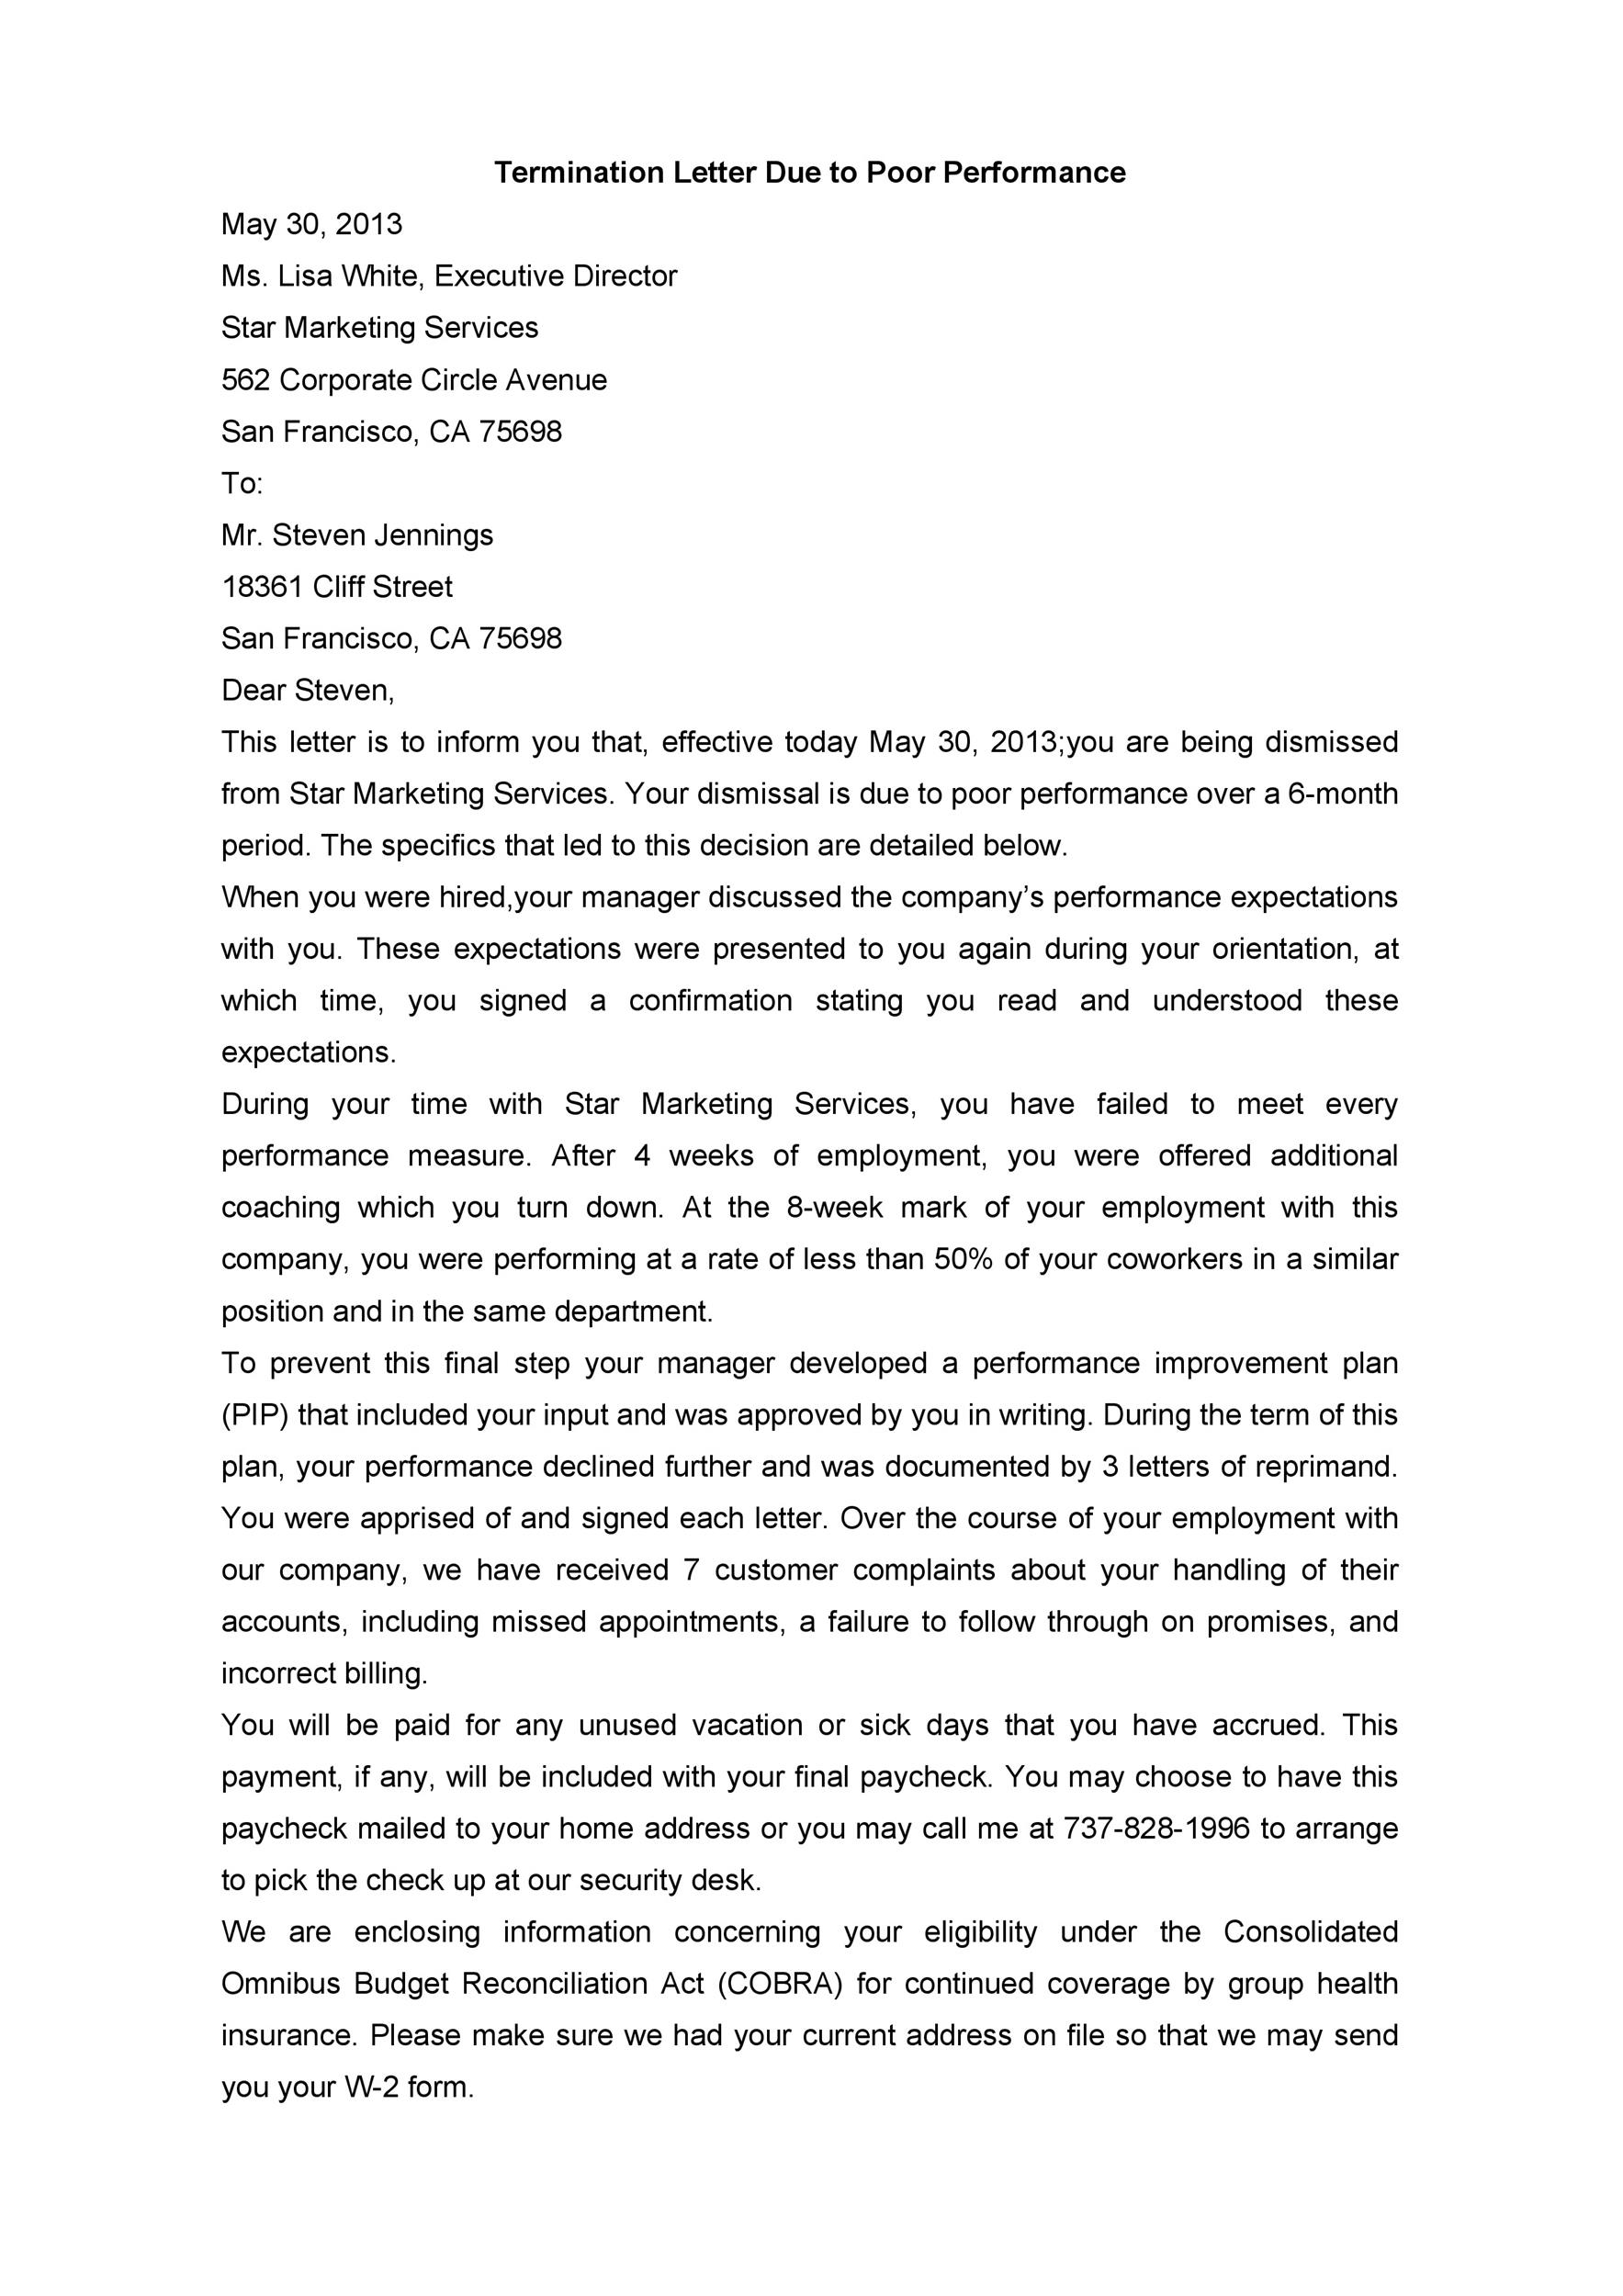 Sample Employee Termination Letter For Poor Work Quality from templatelab.com